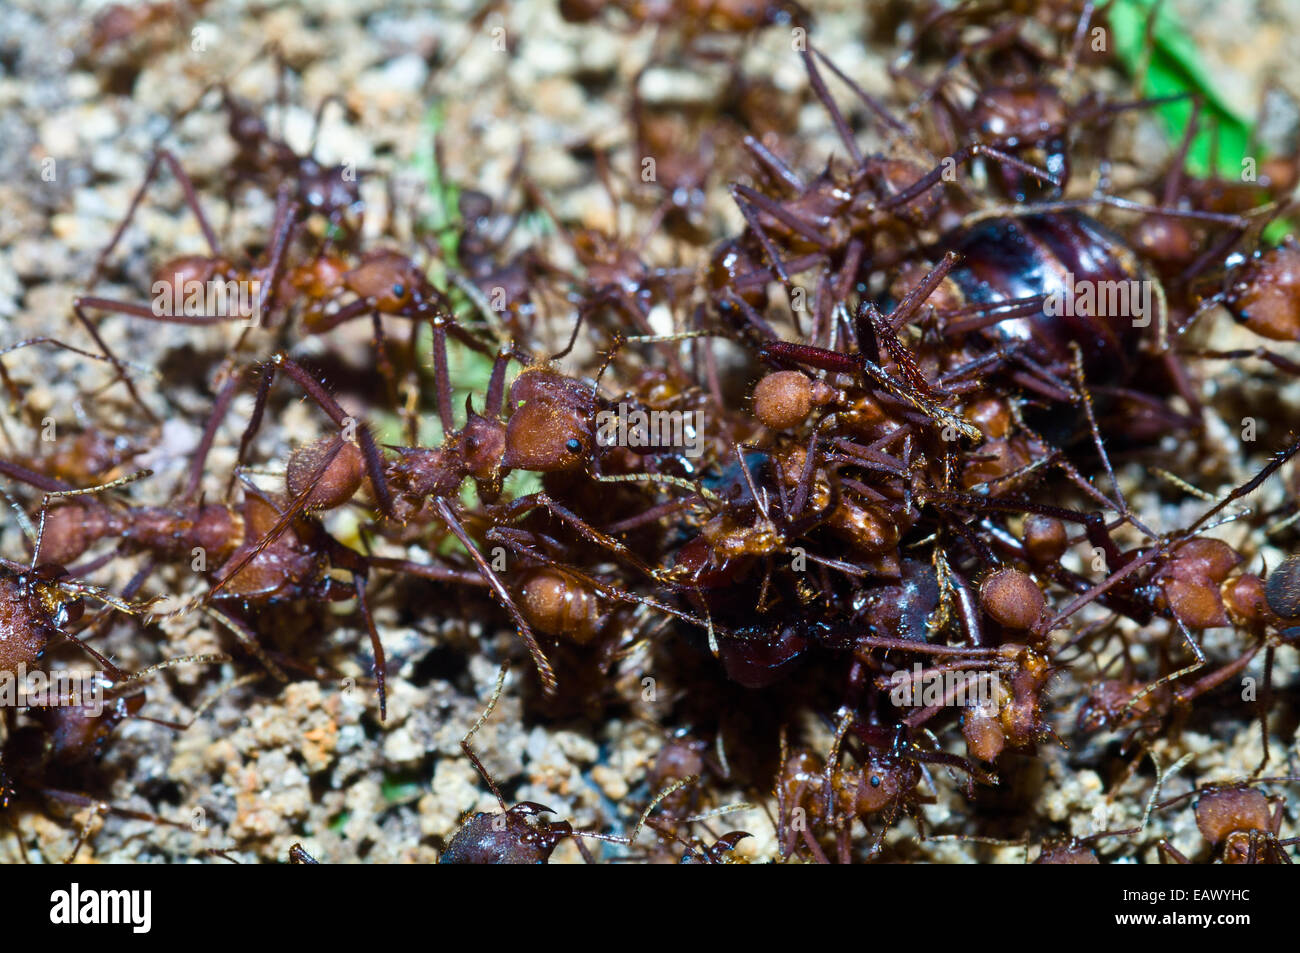 Leaf cutter ant soldiers attack and dismember a rival alate queen captured on her nuptial flight. Stock Photo